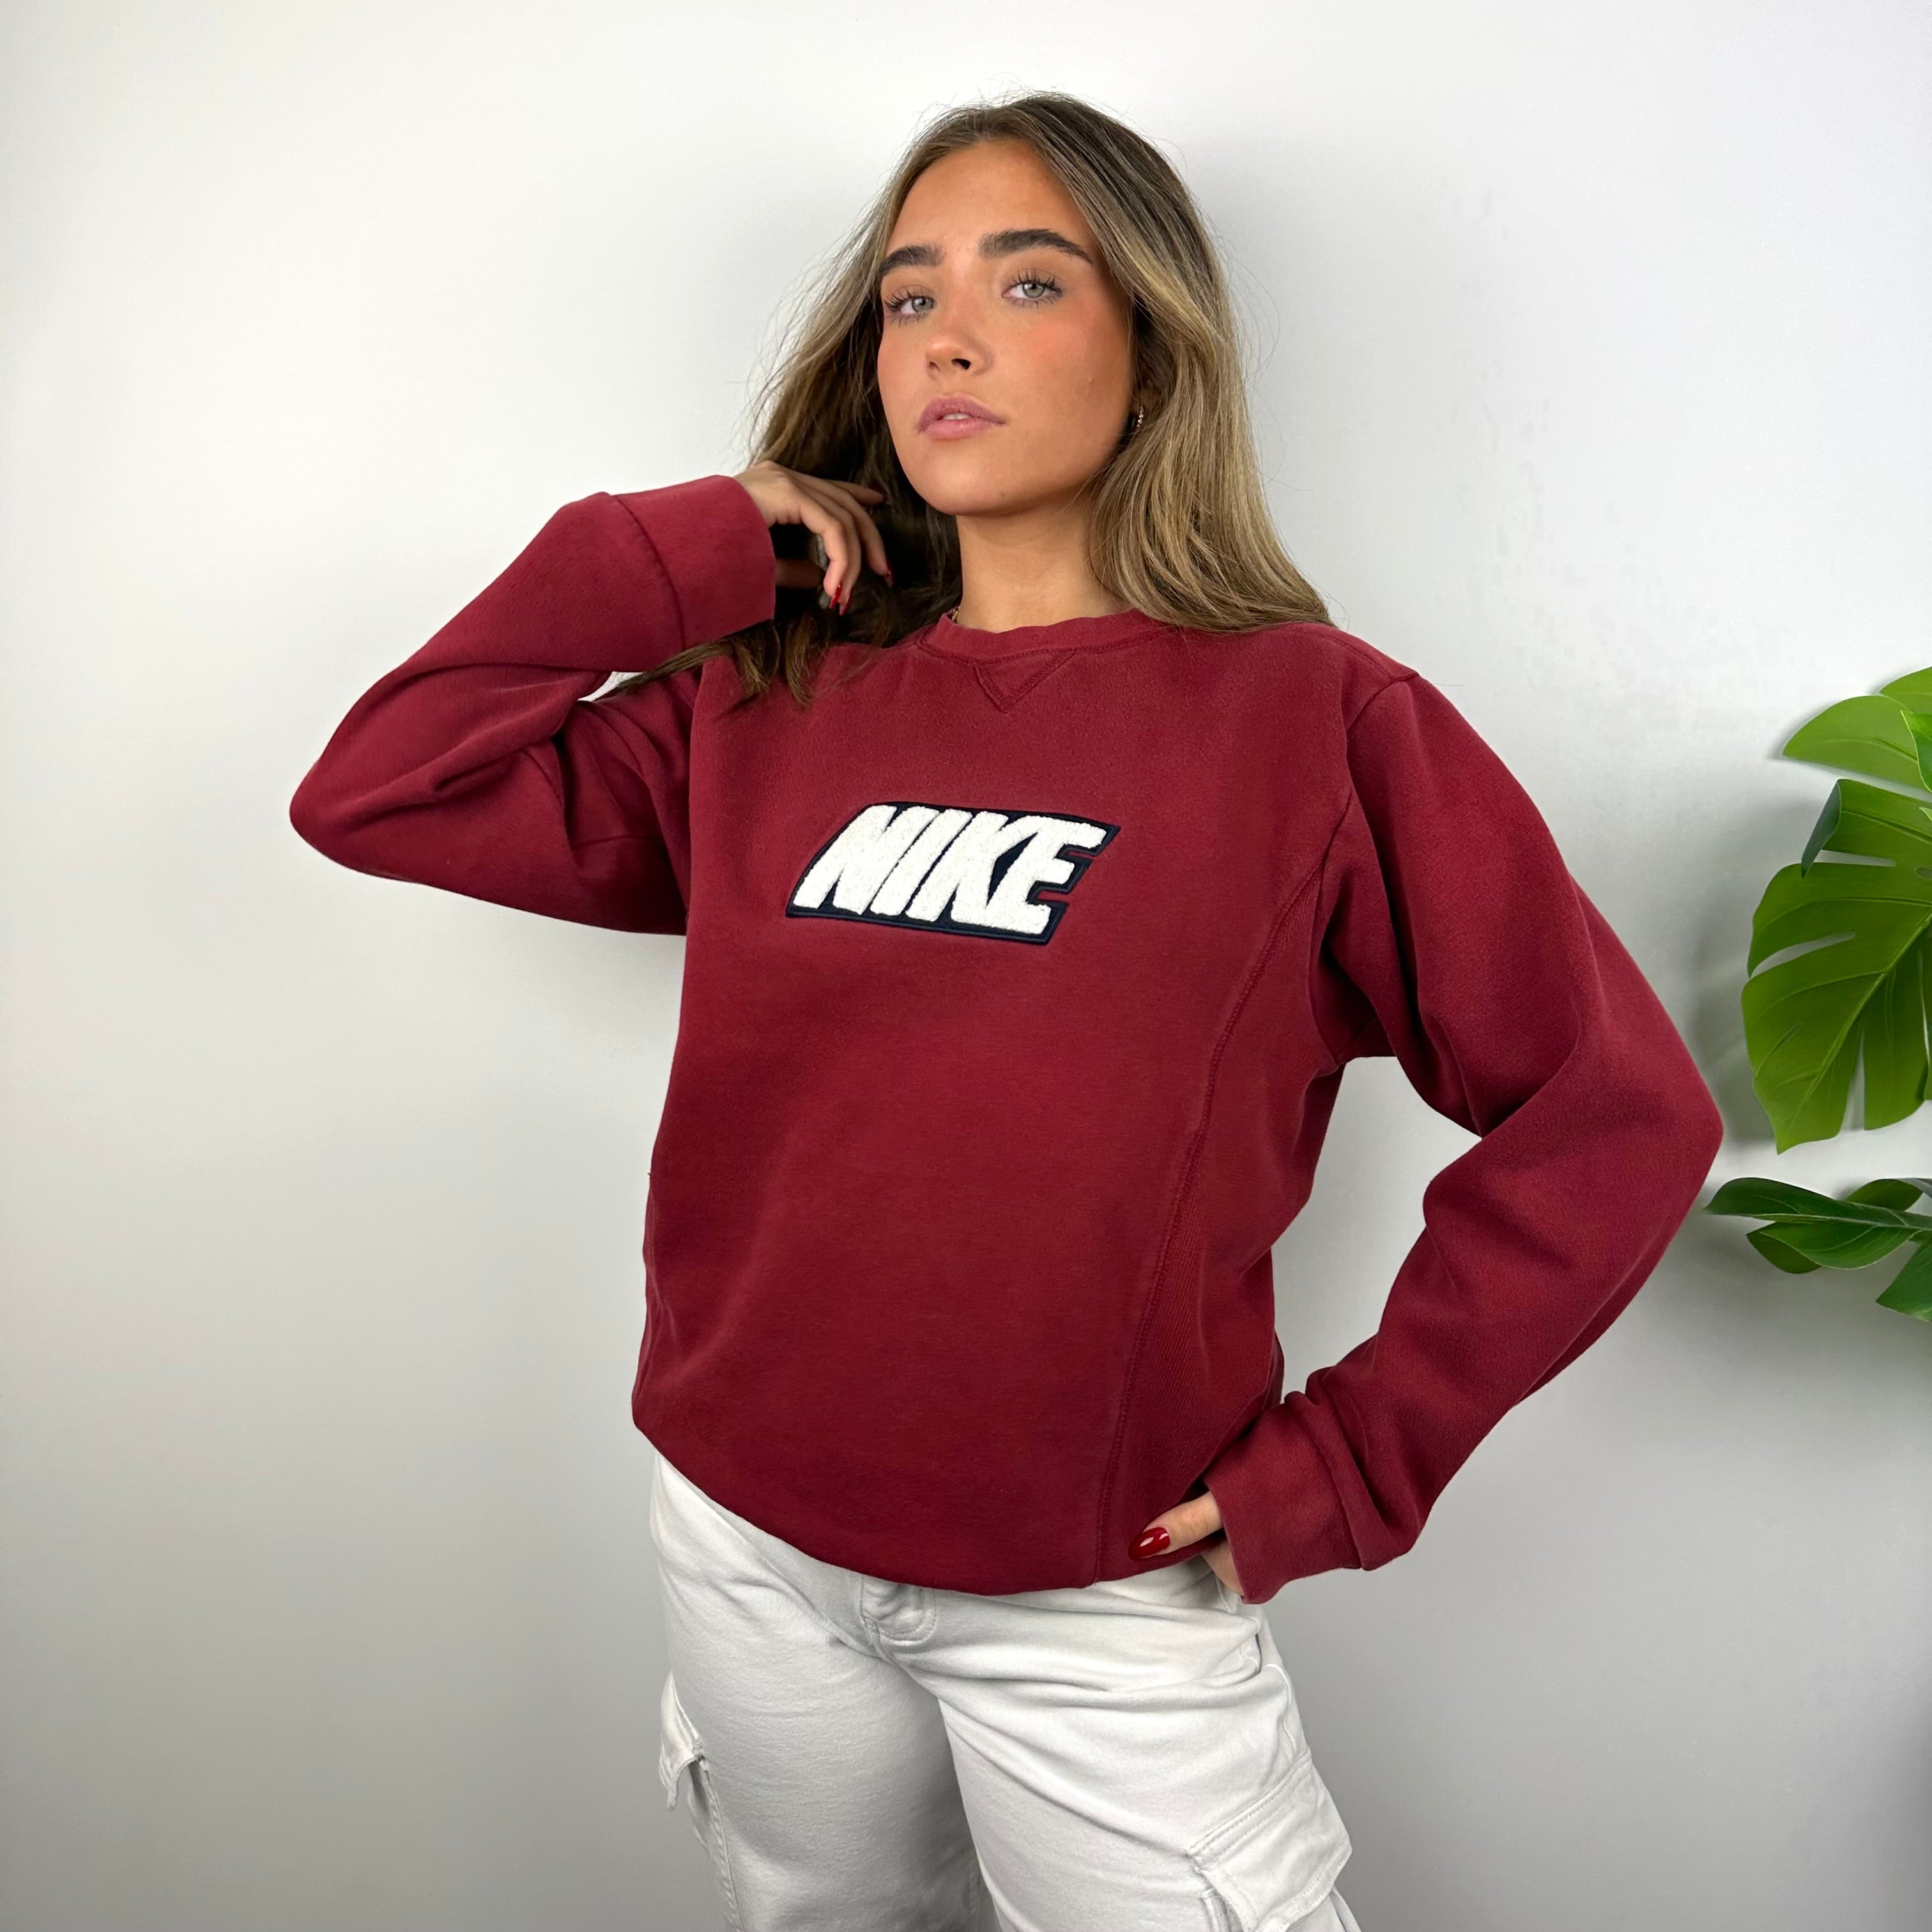 Nike Red Embroidered Spell Out Sweatshirt (M)